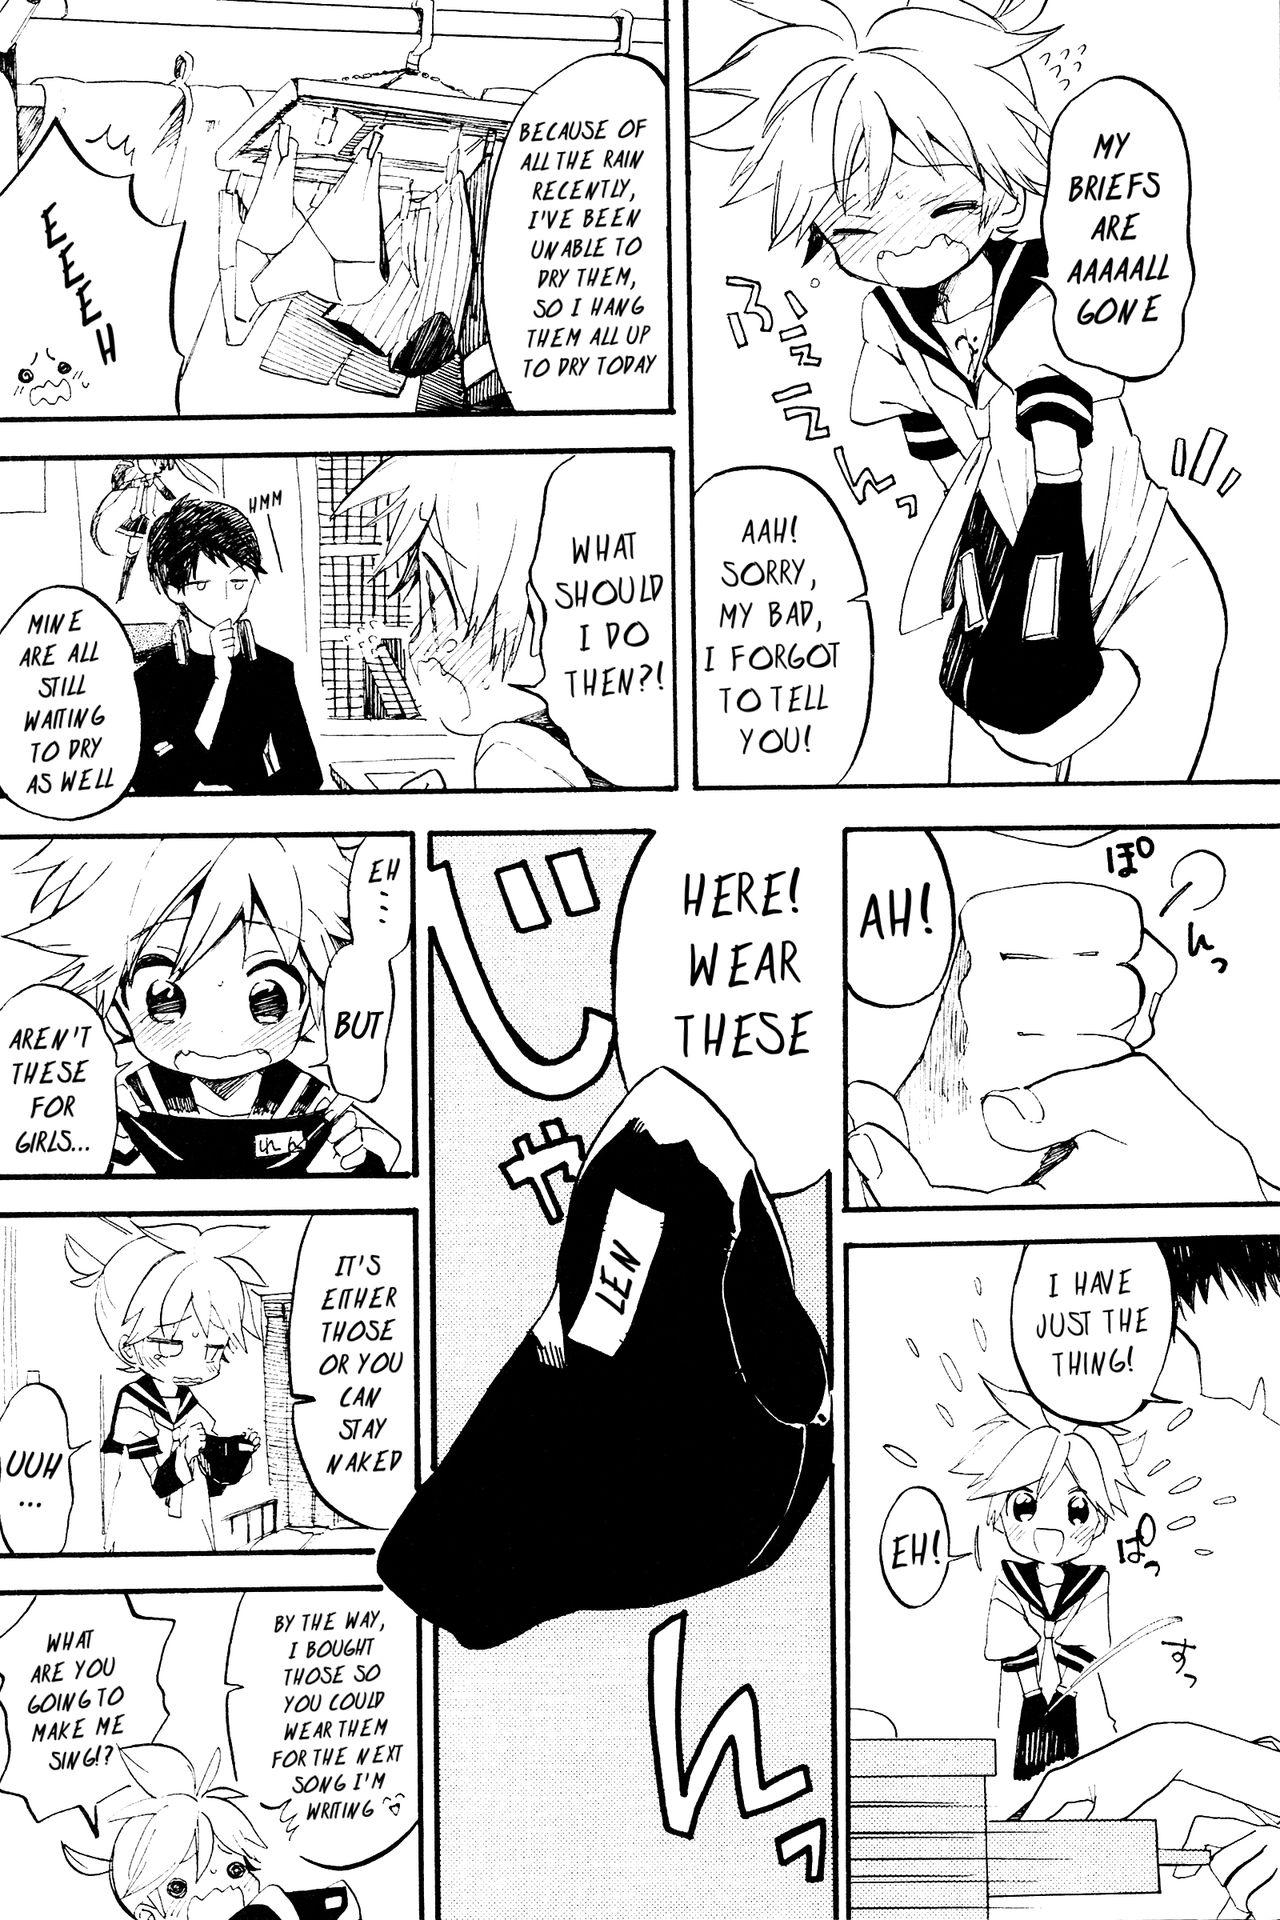 Funny Seraburu! | Sailor-Bloomers! - Vocaloid Clothed Sex - Page 3